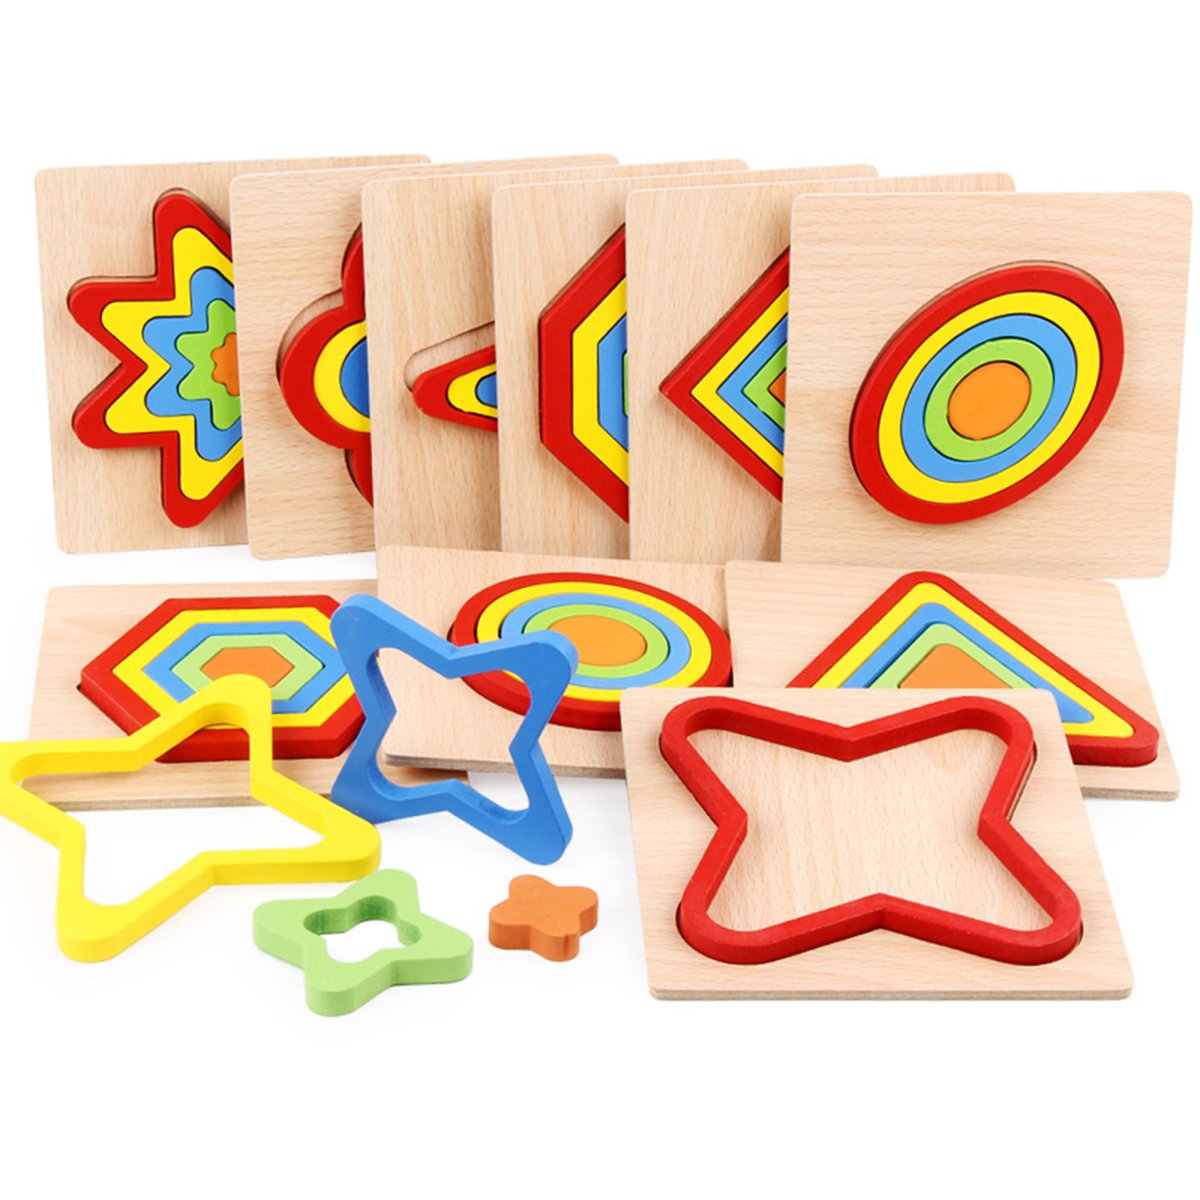 Shape Cognition Board Geometry Jigsaw Puzzle Wooden Kids Educational Learning Toys 1